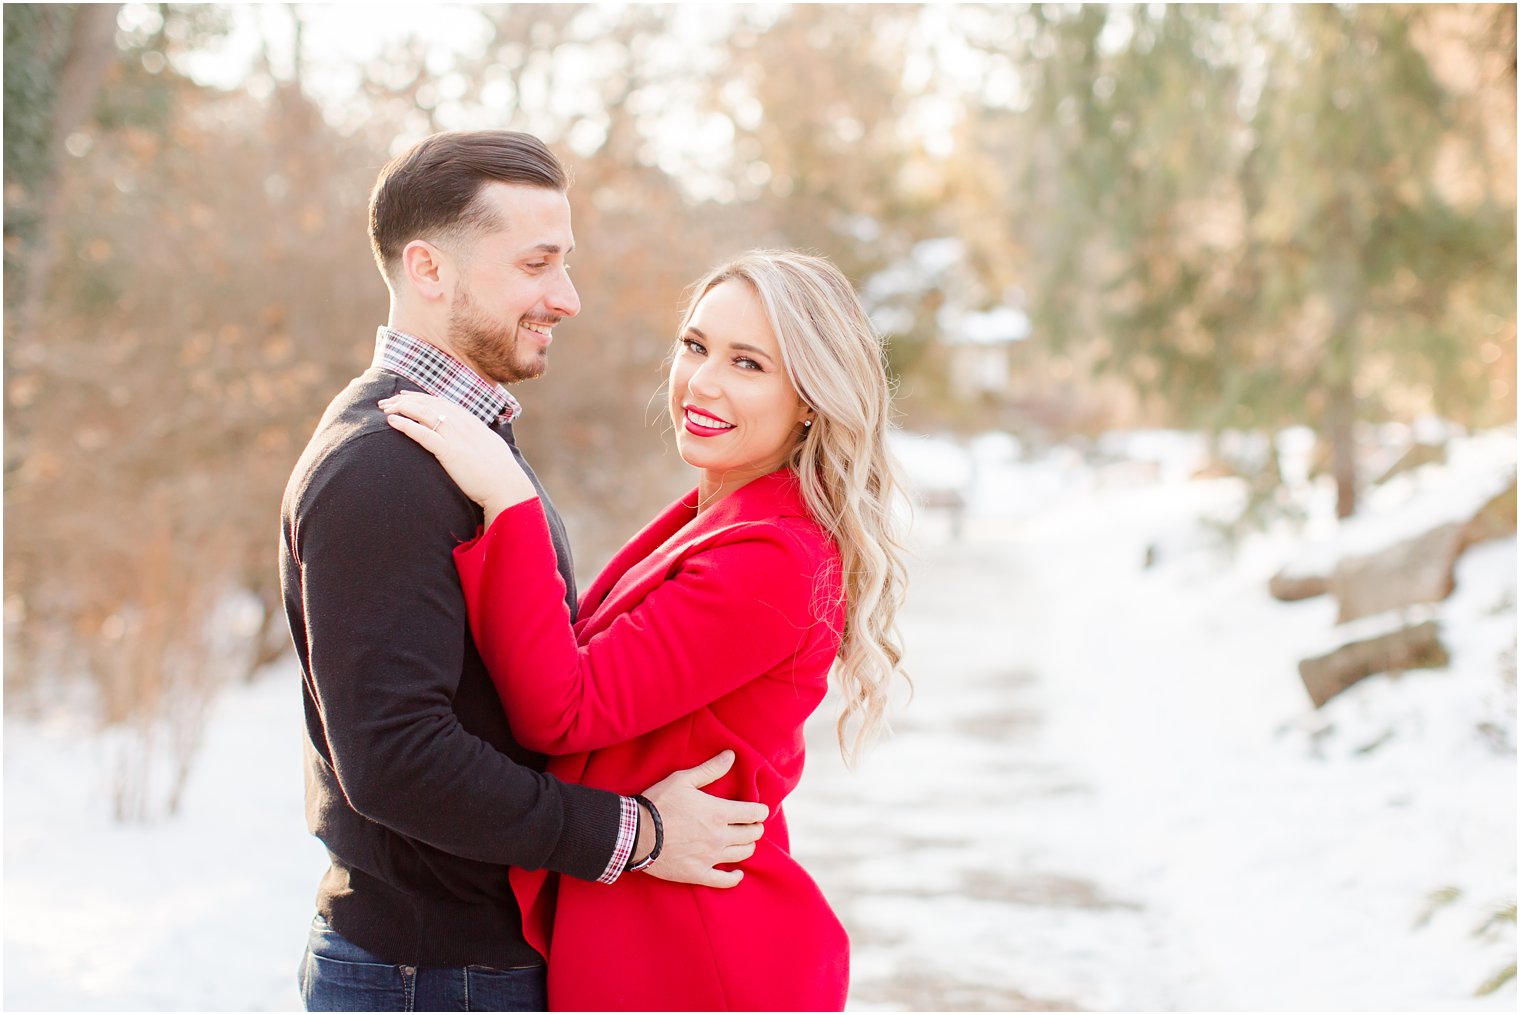 Engagement session with a red coat